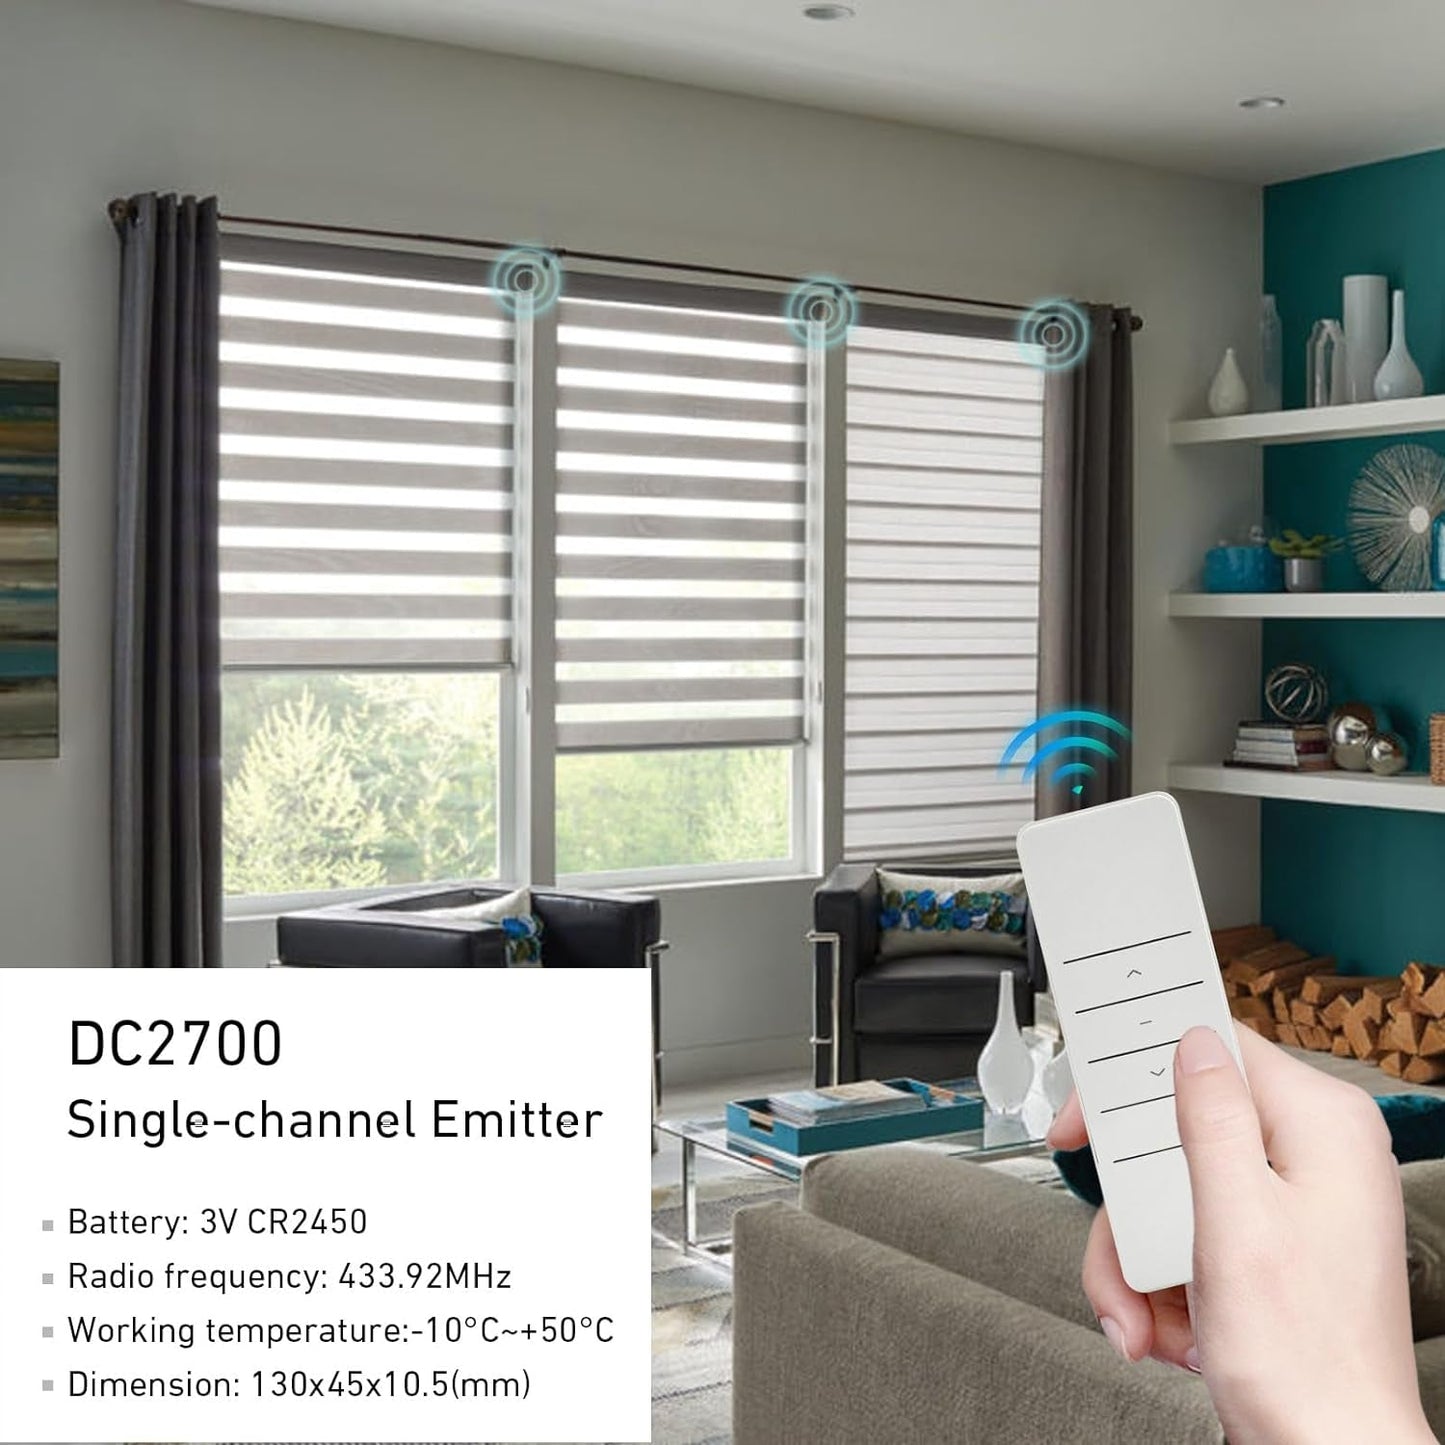 DM25CE 1.5N 12V Roller Shade Motor Power with External Lithium Battery-No Wiring, Wireless App or Timer Control, Add Blinds Motor Compatible with Alexa, Google Home